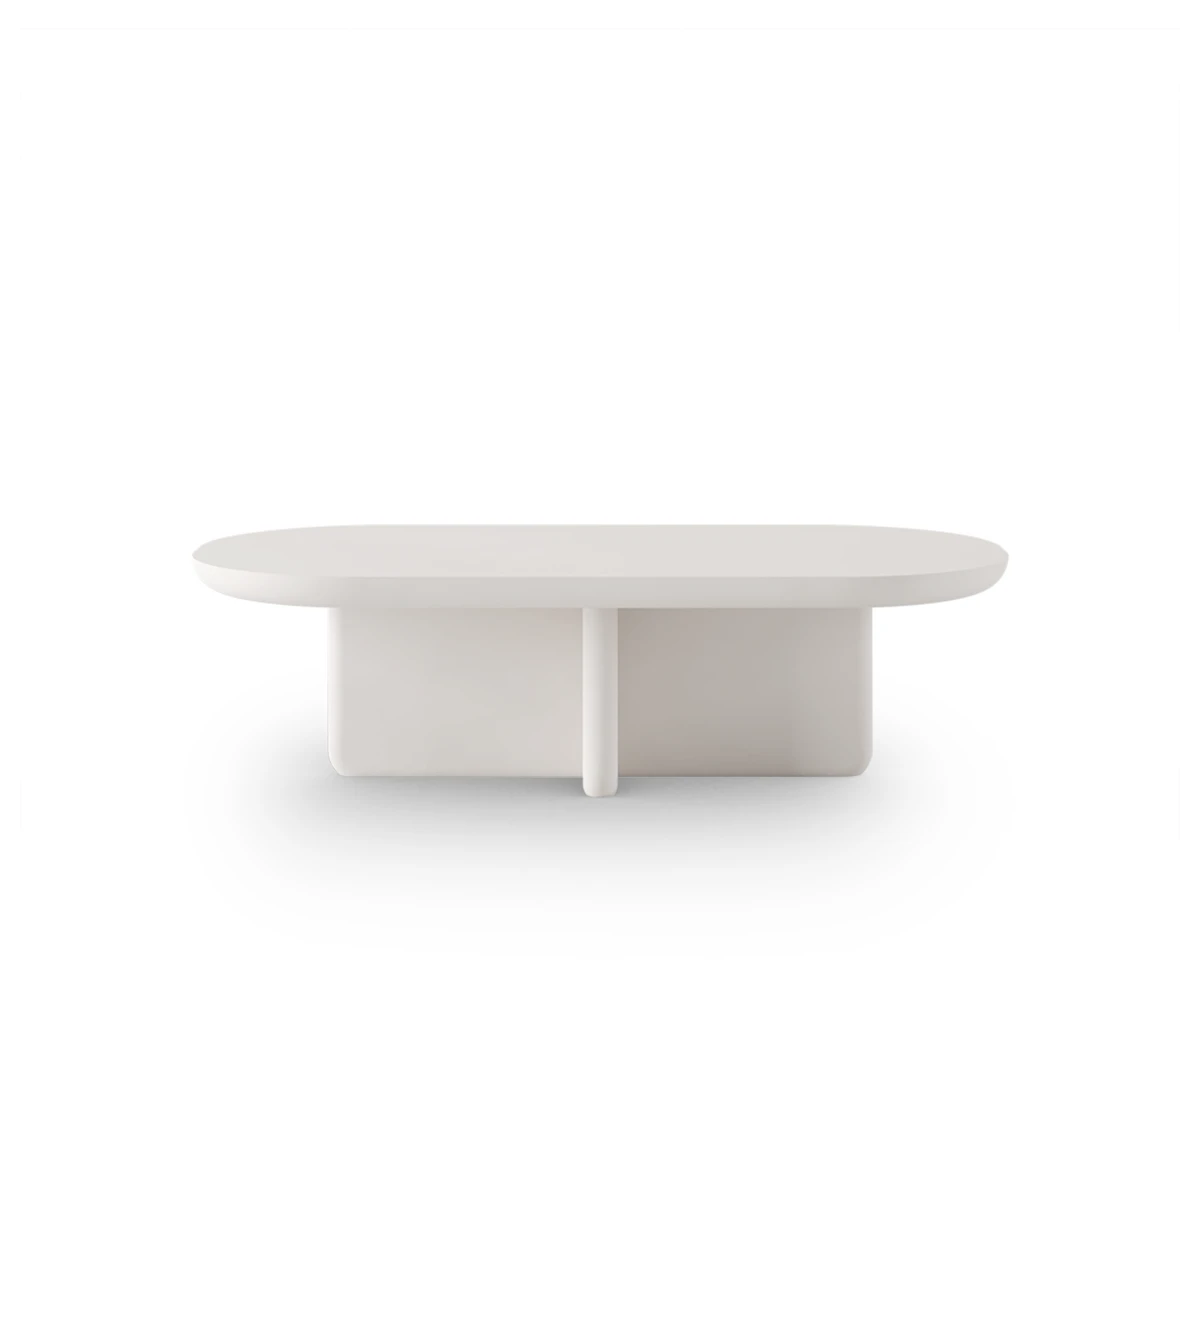 Rectangular center table in pearl lacquer.